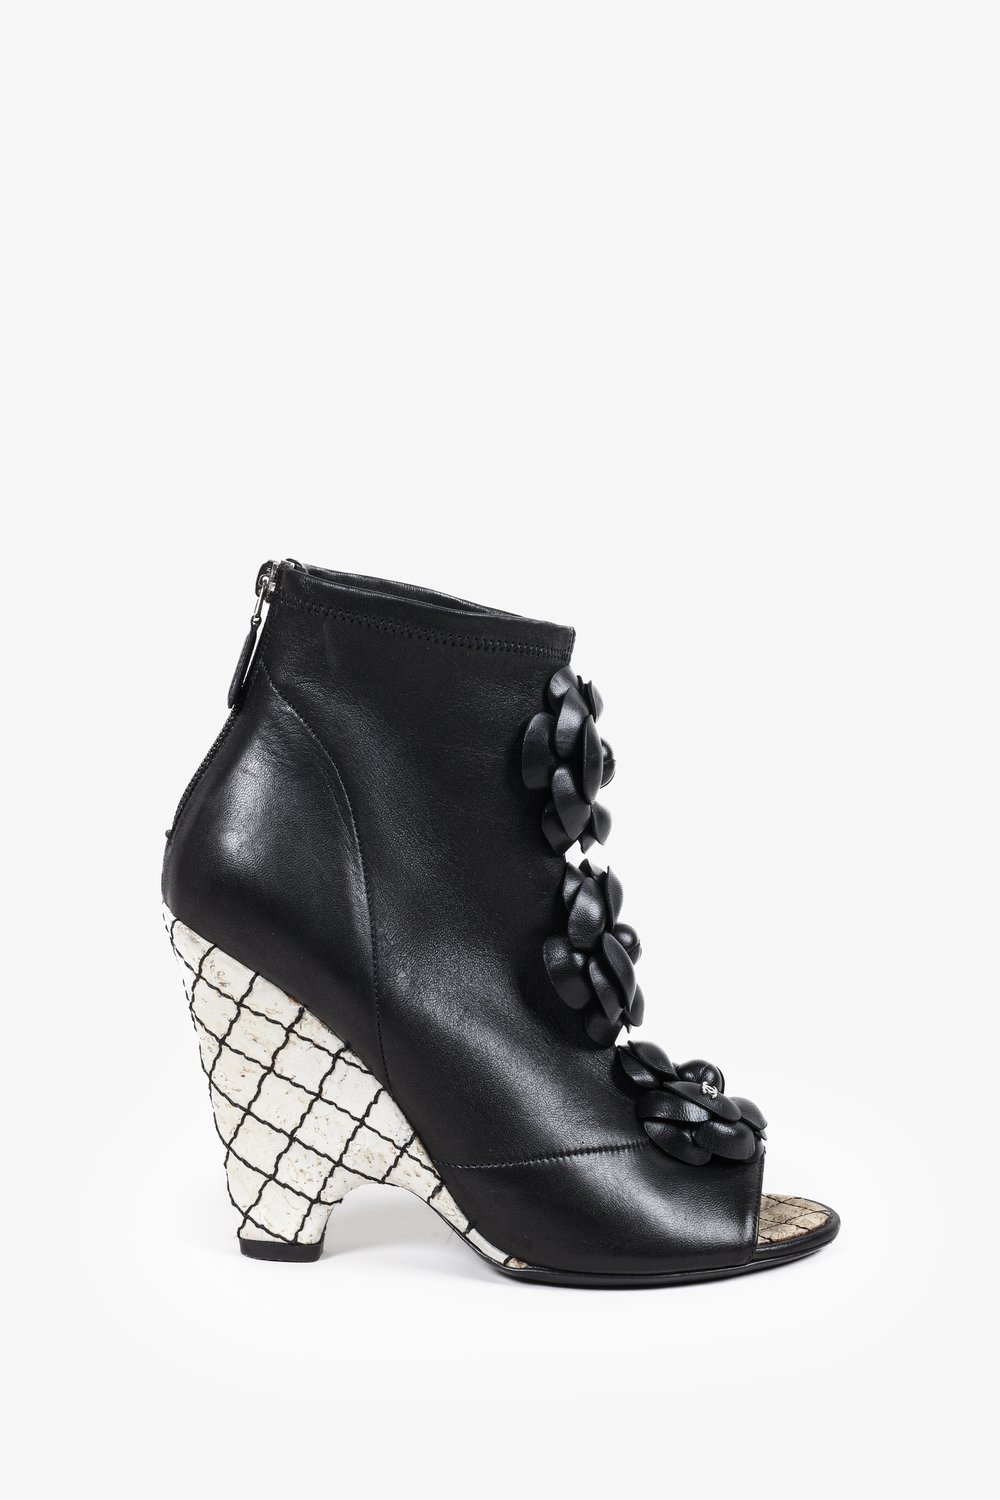 Chanel Camellia Wedge Booties — BLOGGER ARMOIRE